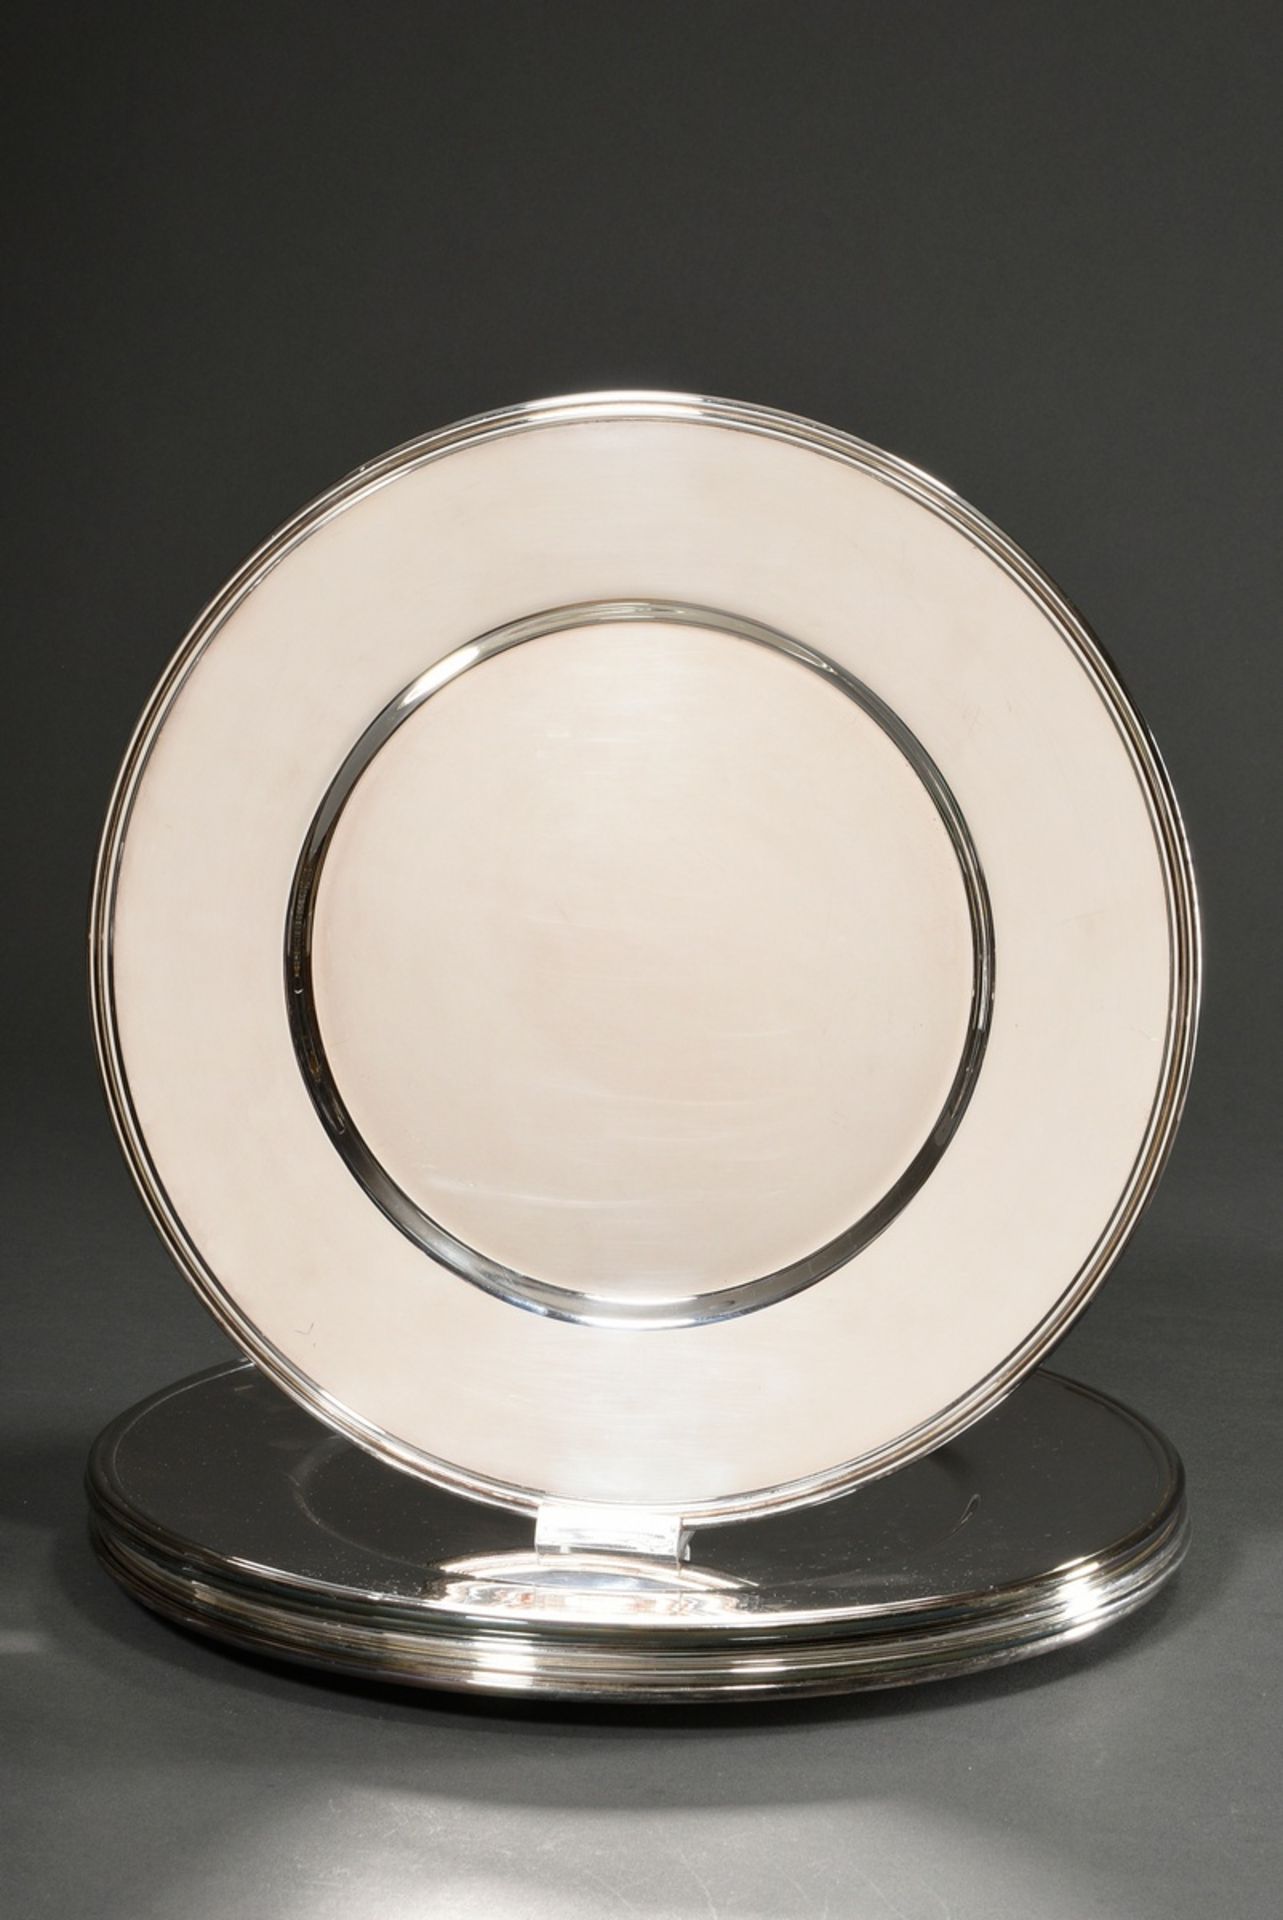 6 Modern place plates in a simple design, Wilkens, silver 925, 6240g, Ø 32cm, in original sleeves - Image 7 of 7